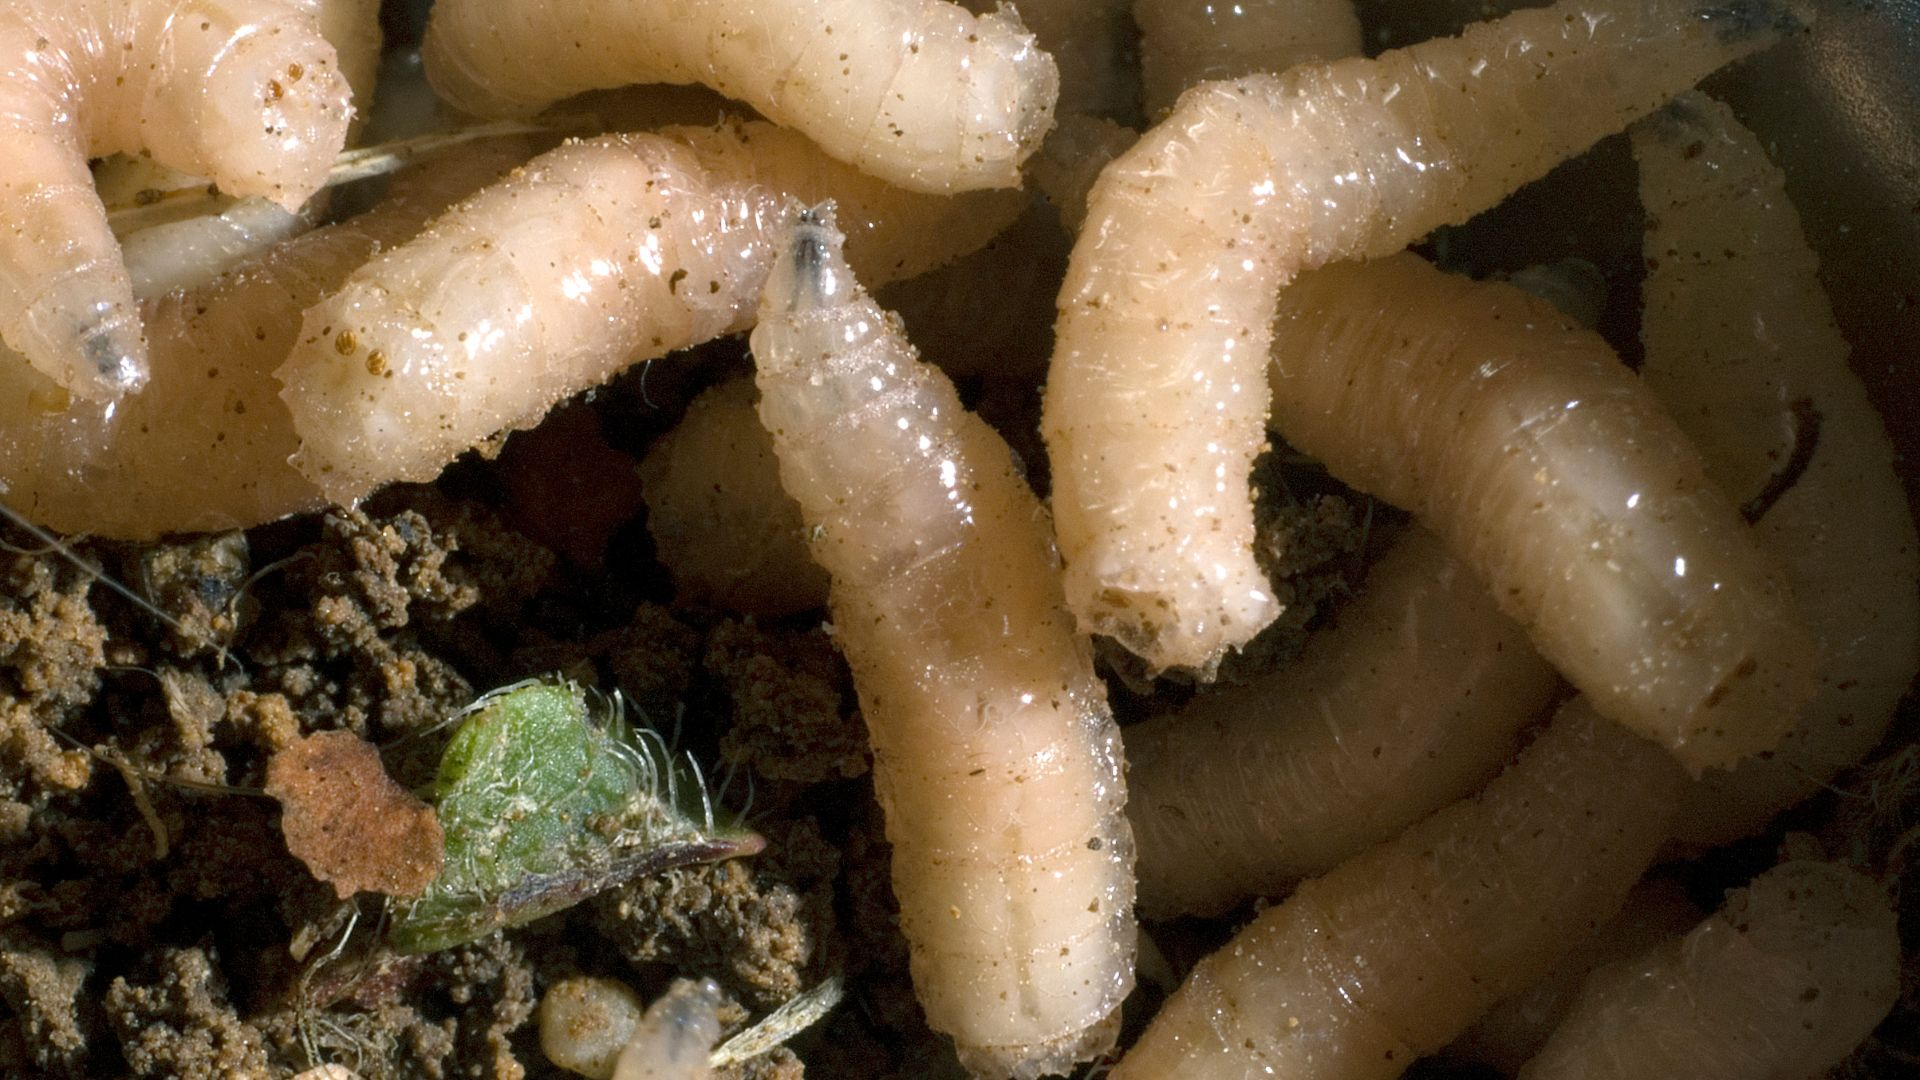 An image of fly larvae or maggots.